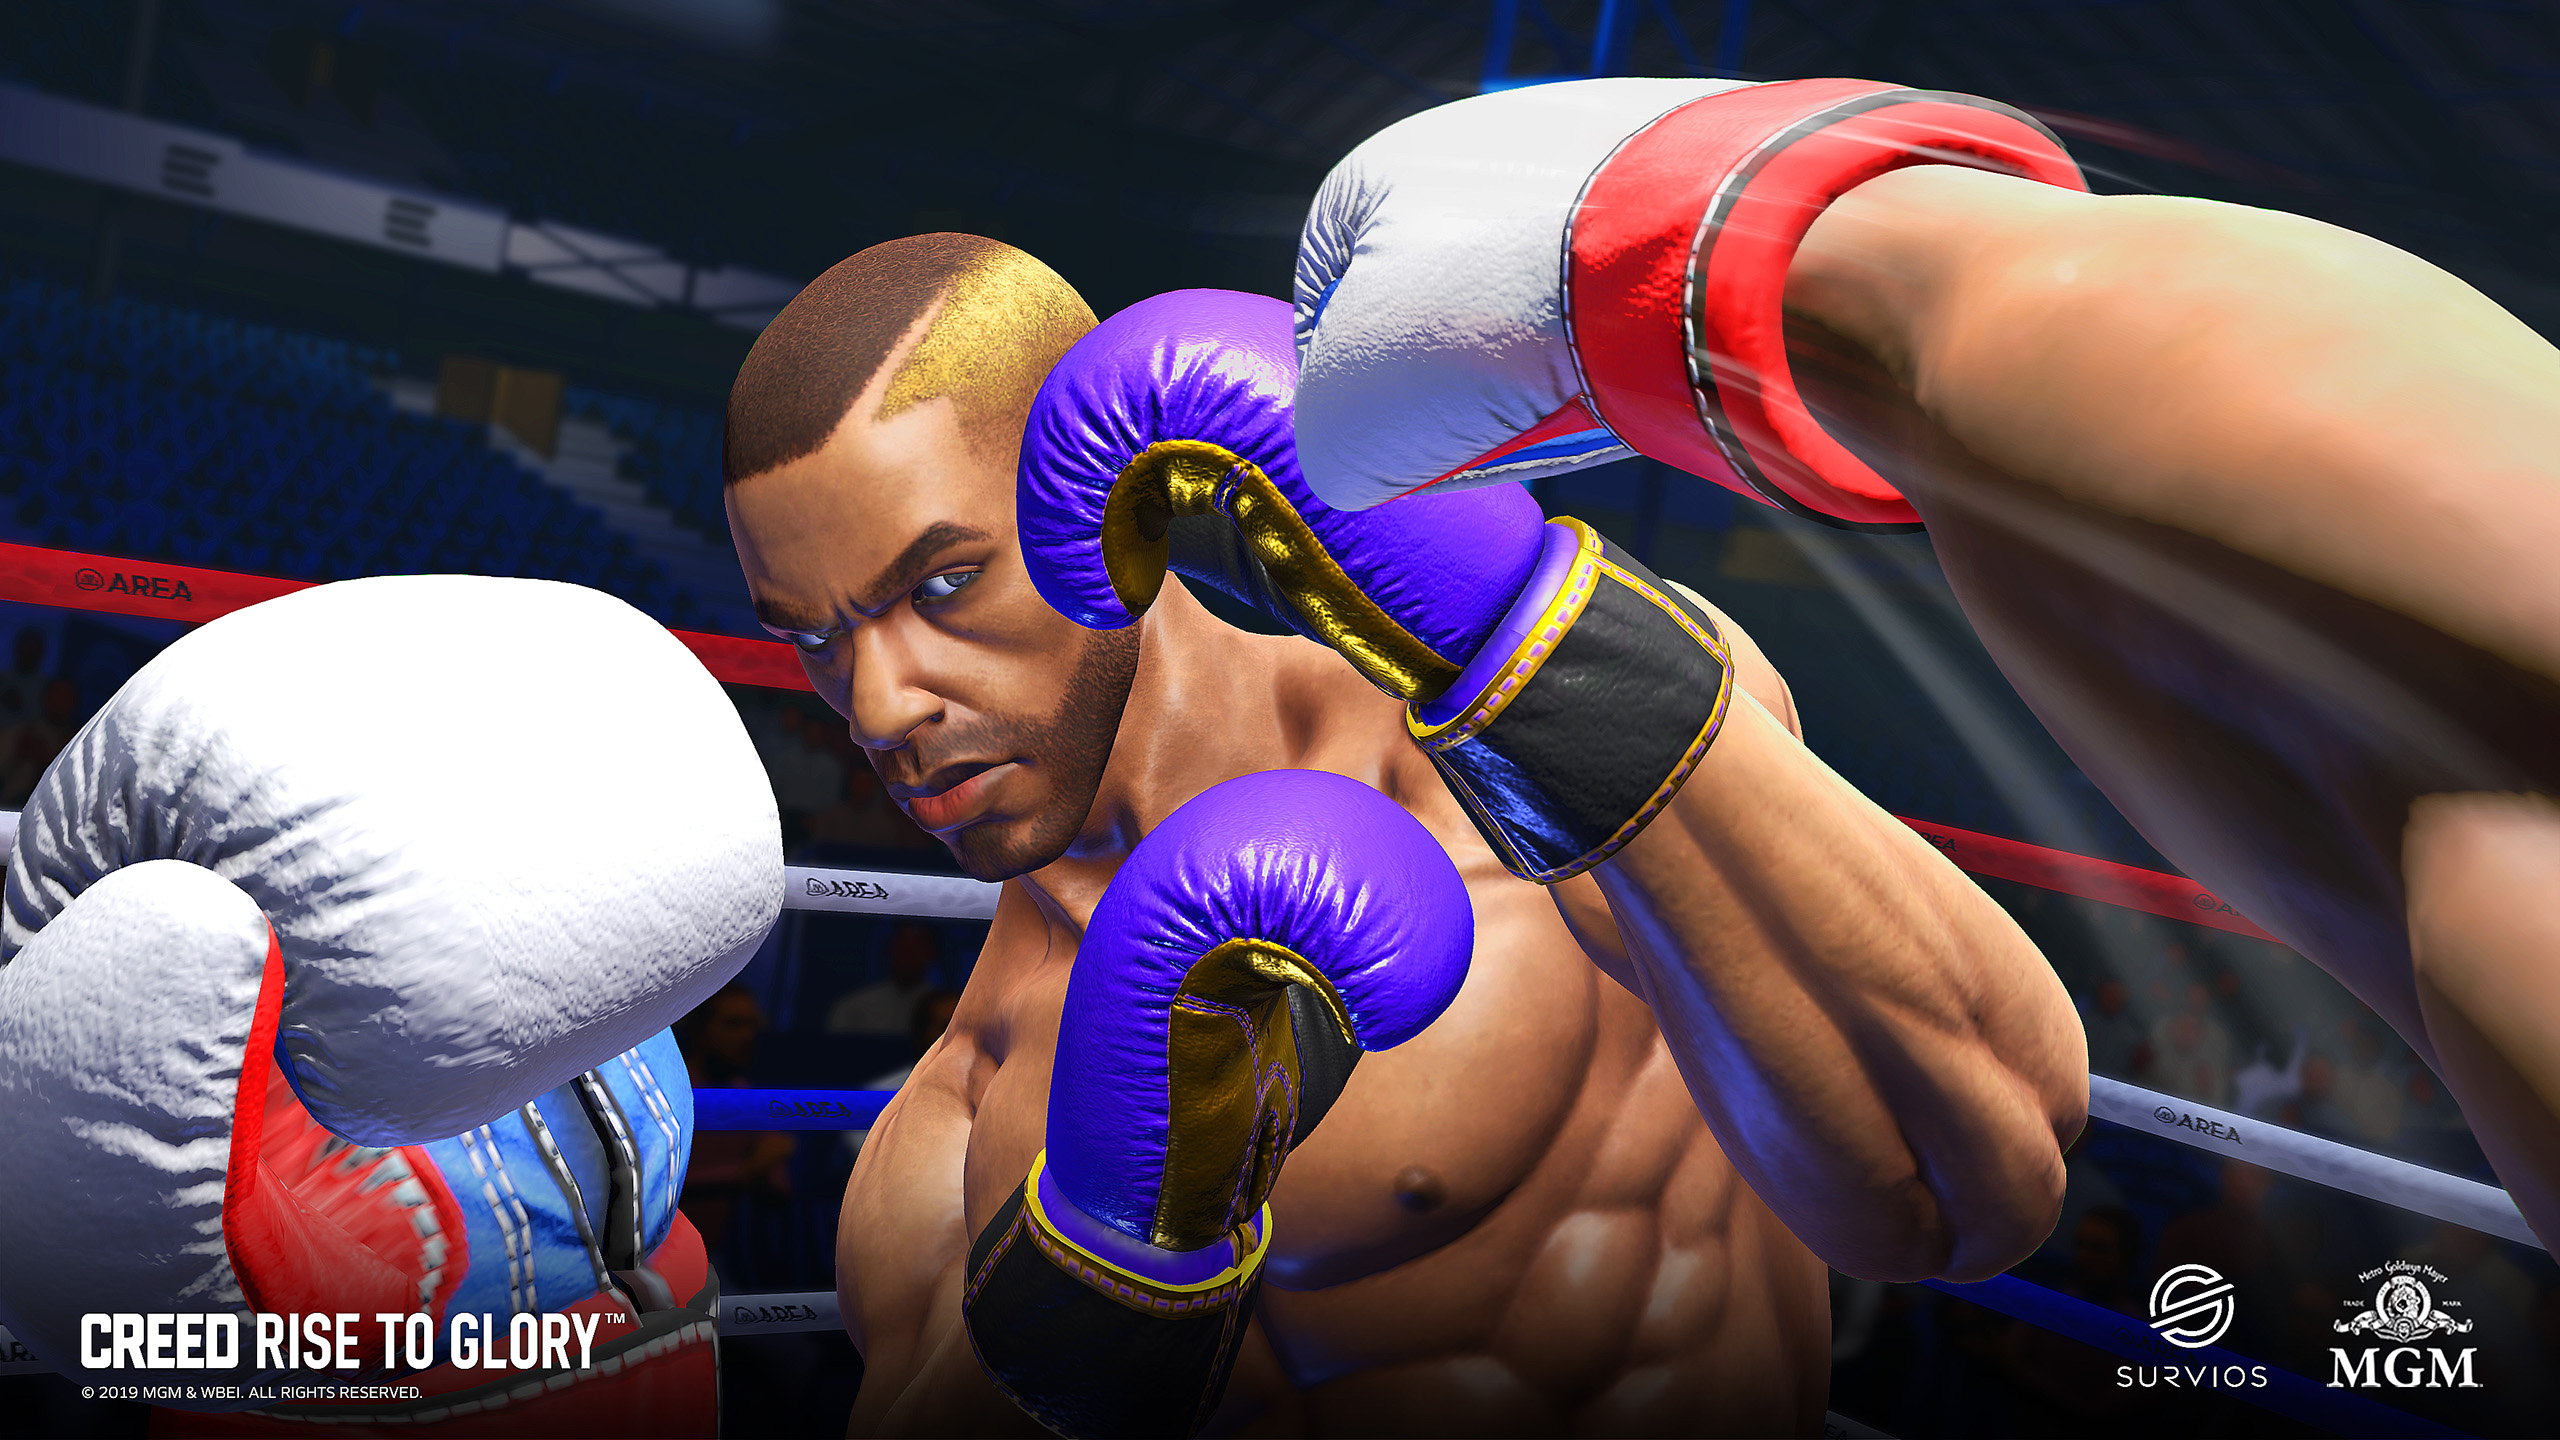 CREED: Rise to Glory™ is Coming to Oculus Quest May 21 with Cross-Buy Availability